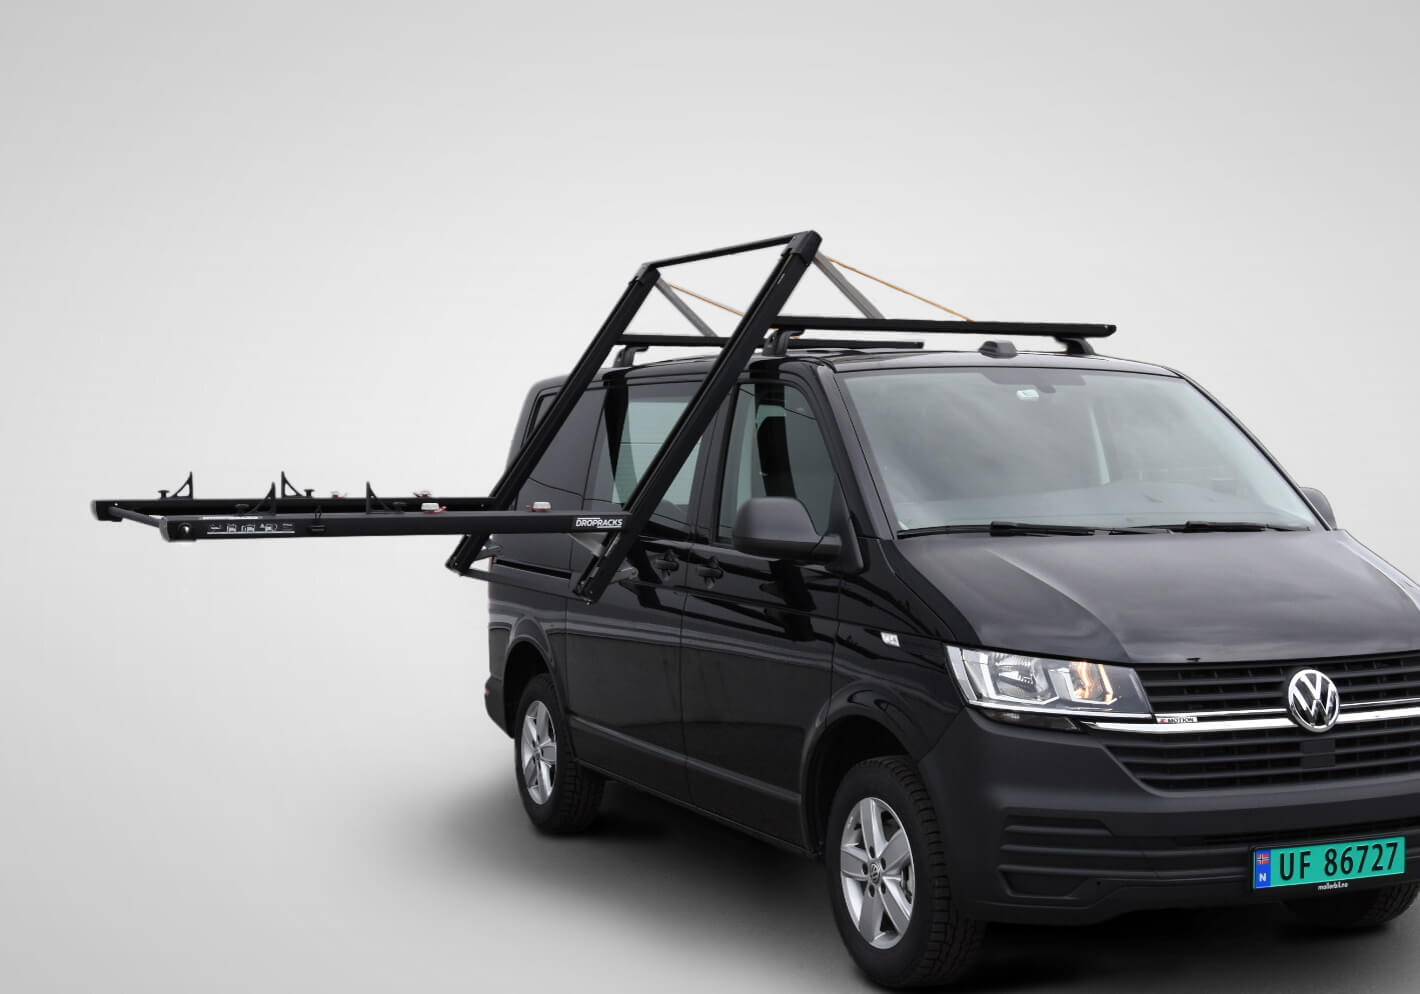 Volkswagen VW Crafter L2 (MWB) H1 (low roof) (2006 to 2017):Dropracks XL roof loading system (vehicle roof connectors at extra cost)